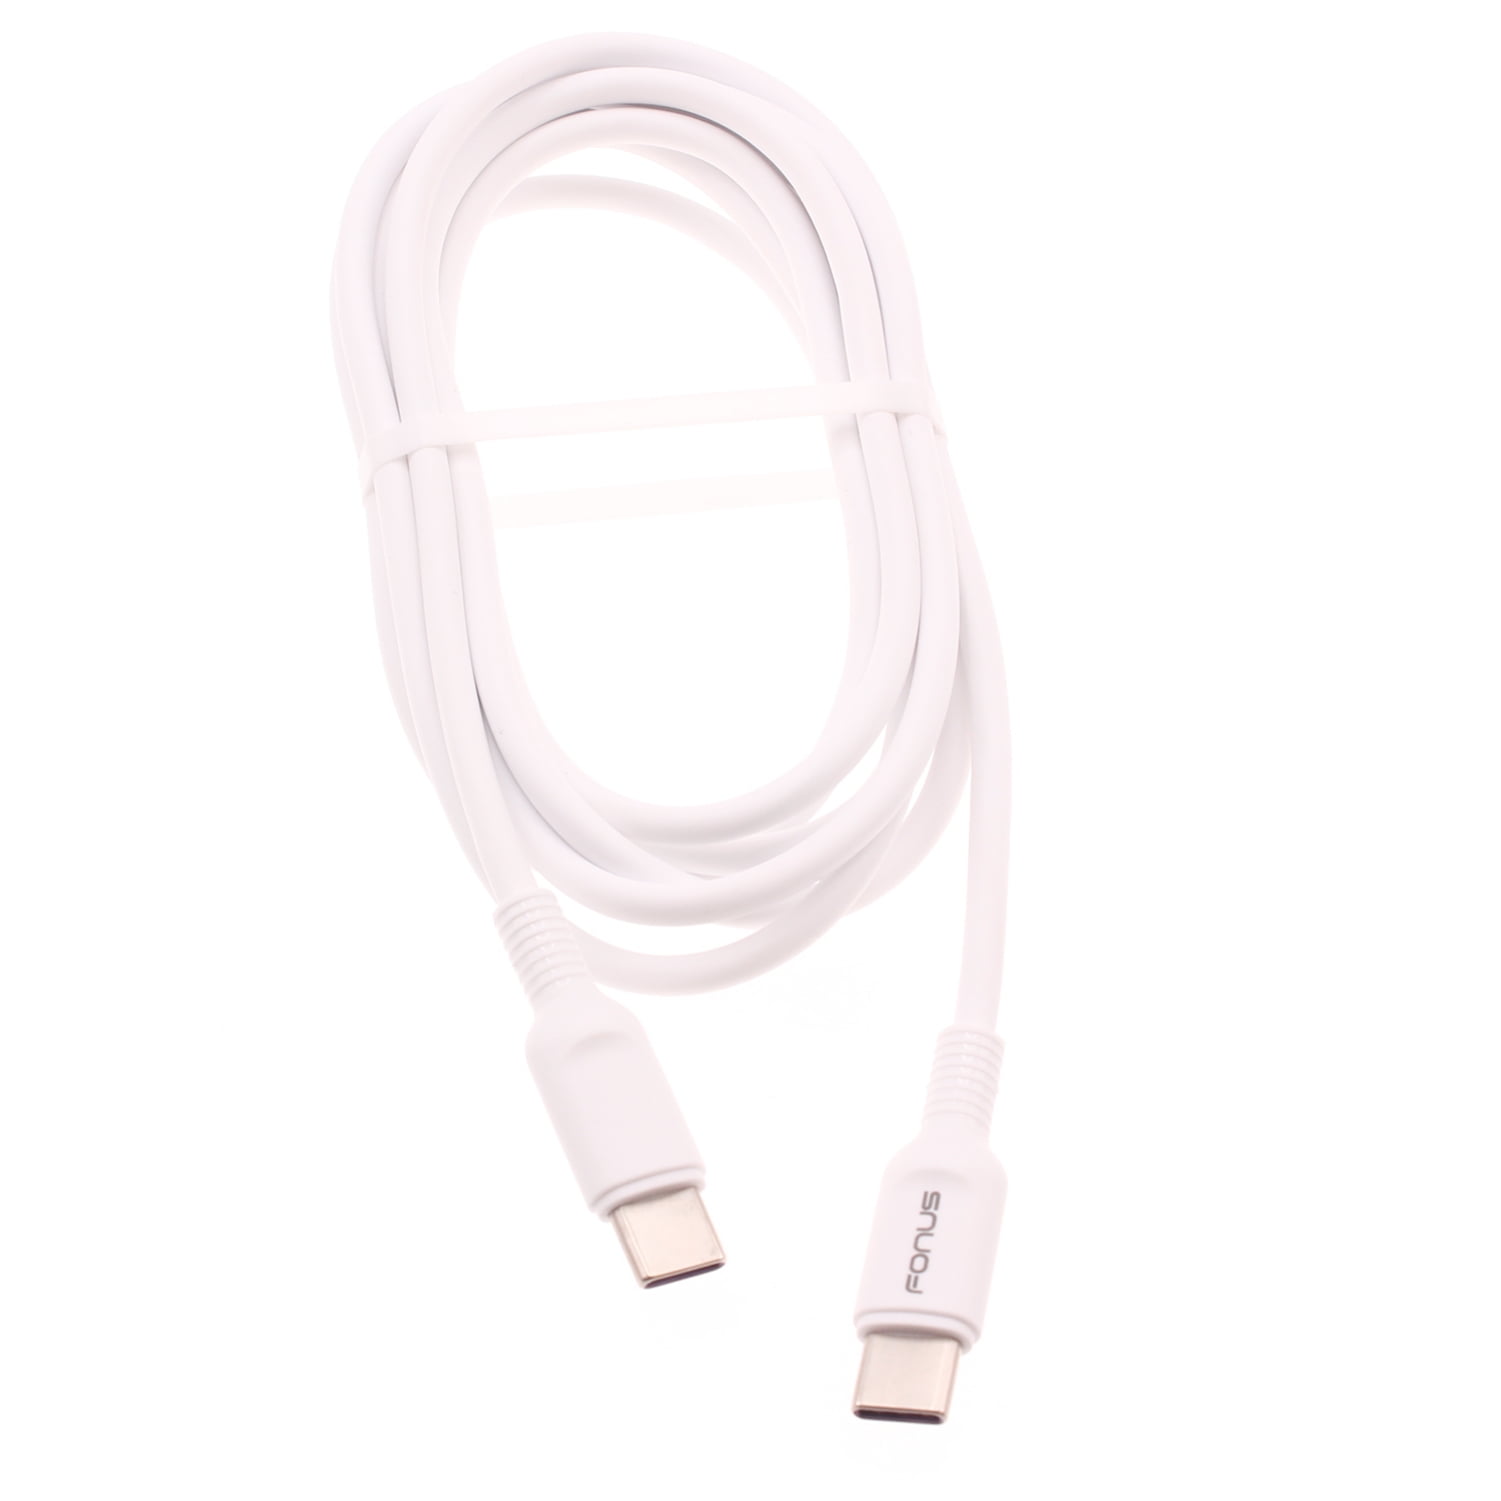 banaan krokodil Reusachtig PD Fast Charger Cord 6ft Long Type-C Cable for Google Pixel 6a/6/Pro Phones  - Power Wire Sync (USB-C to USB-C) Chord for Google Pixel 6a/6/Pro Models -  Walmart.com